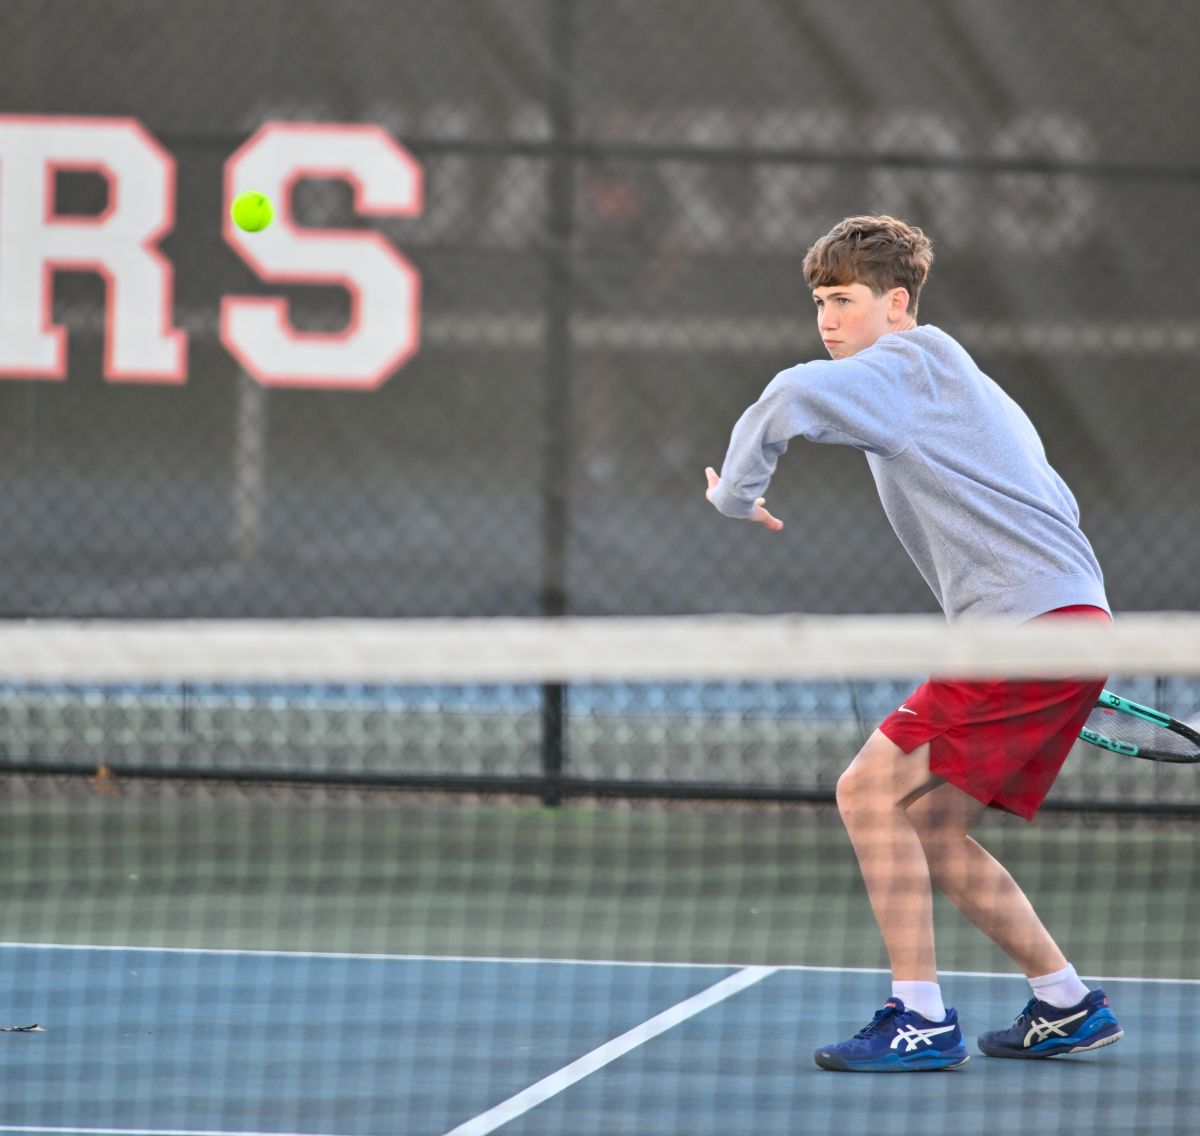 dover-at-np-tennis-4-4-24-73.jpg